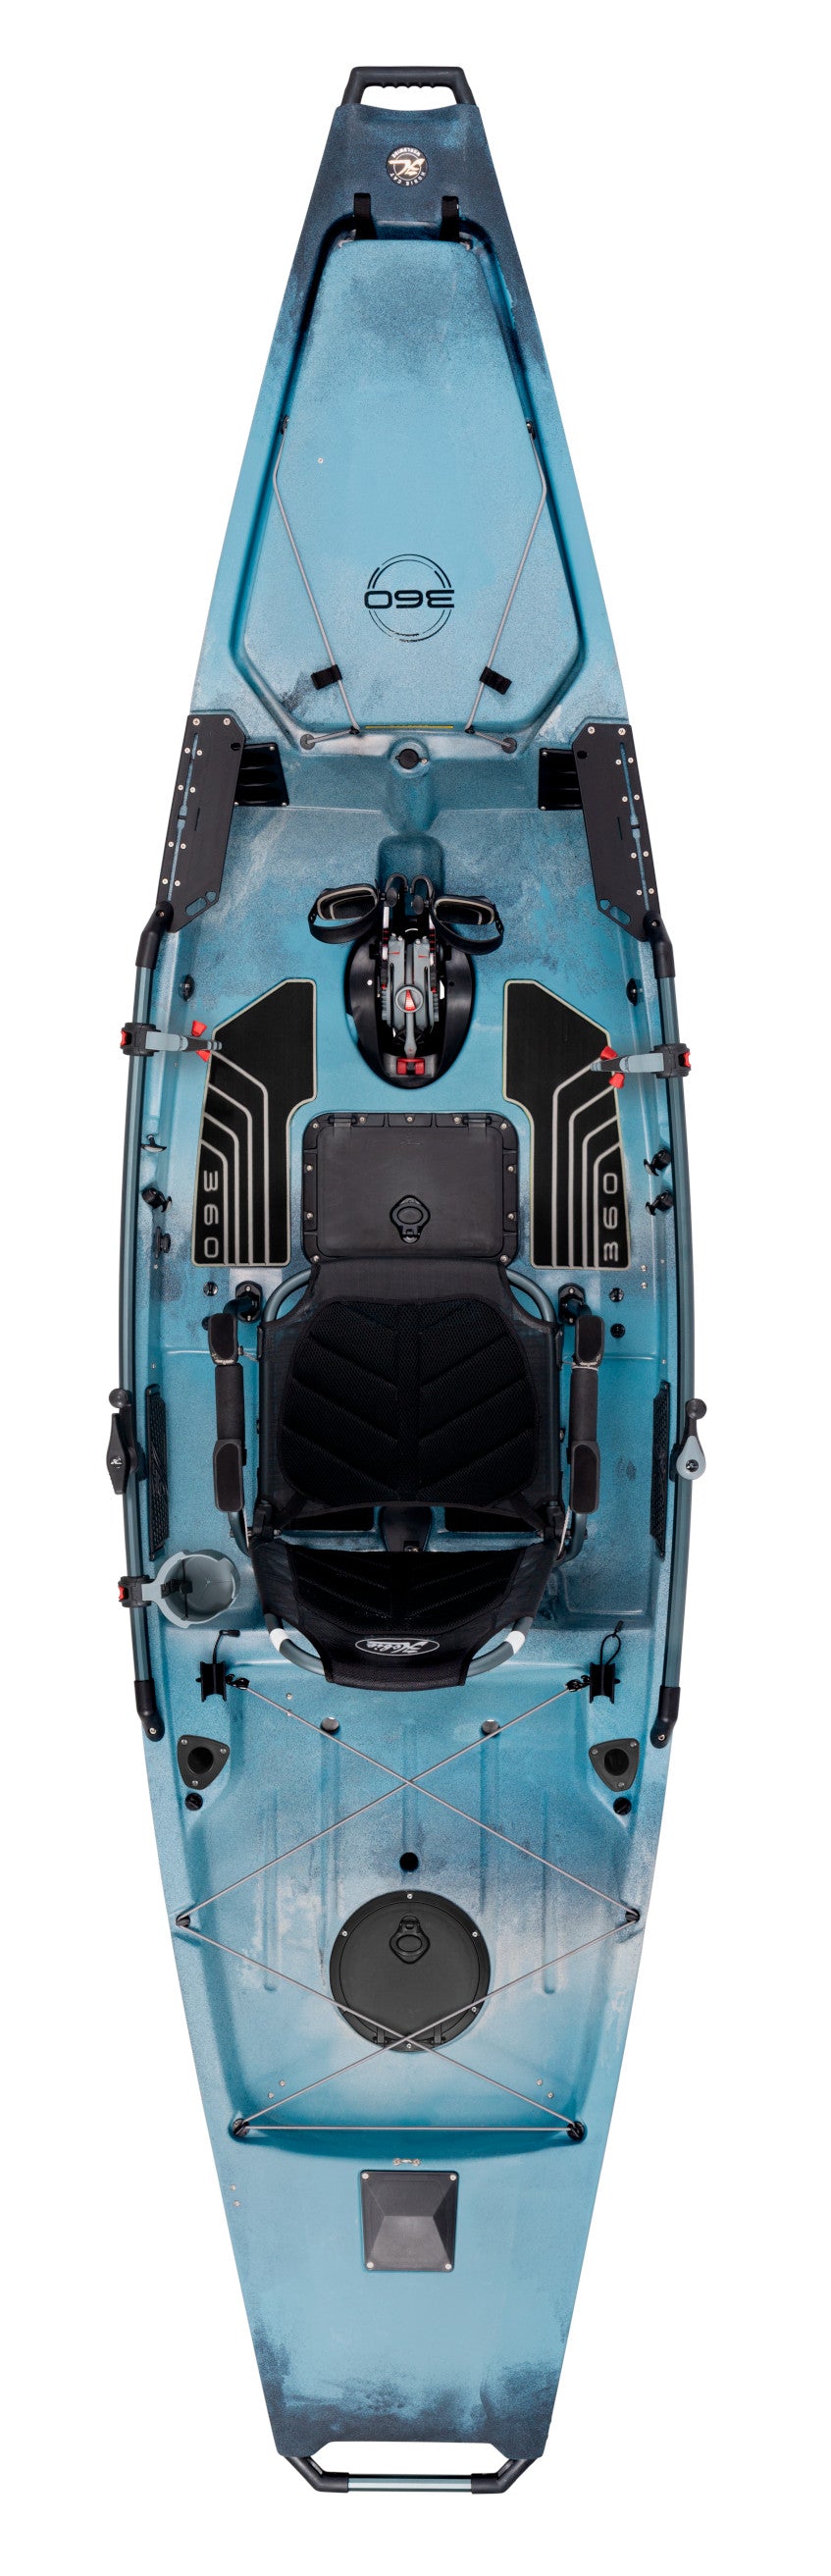 The top view of a blue fishing kayak with Hobie Pro Angler 360 XR - 14ft Drive Technology.